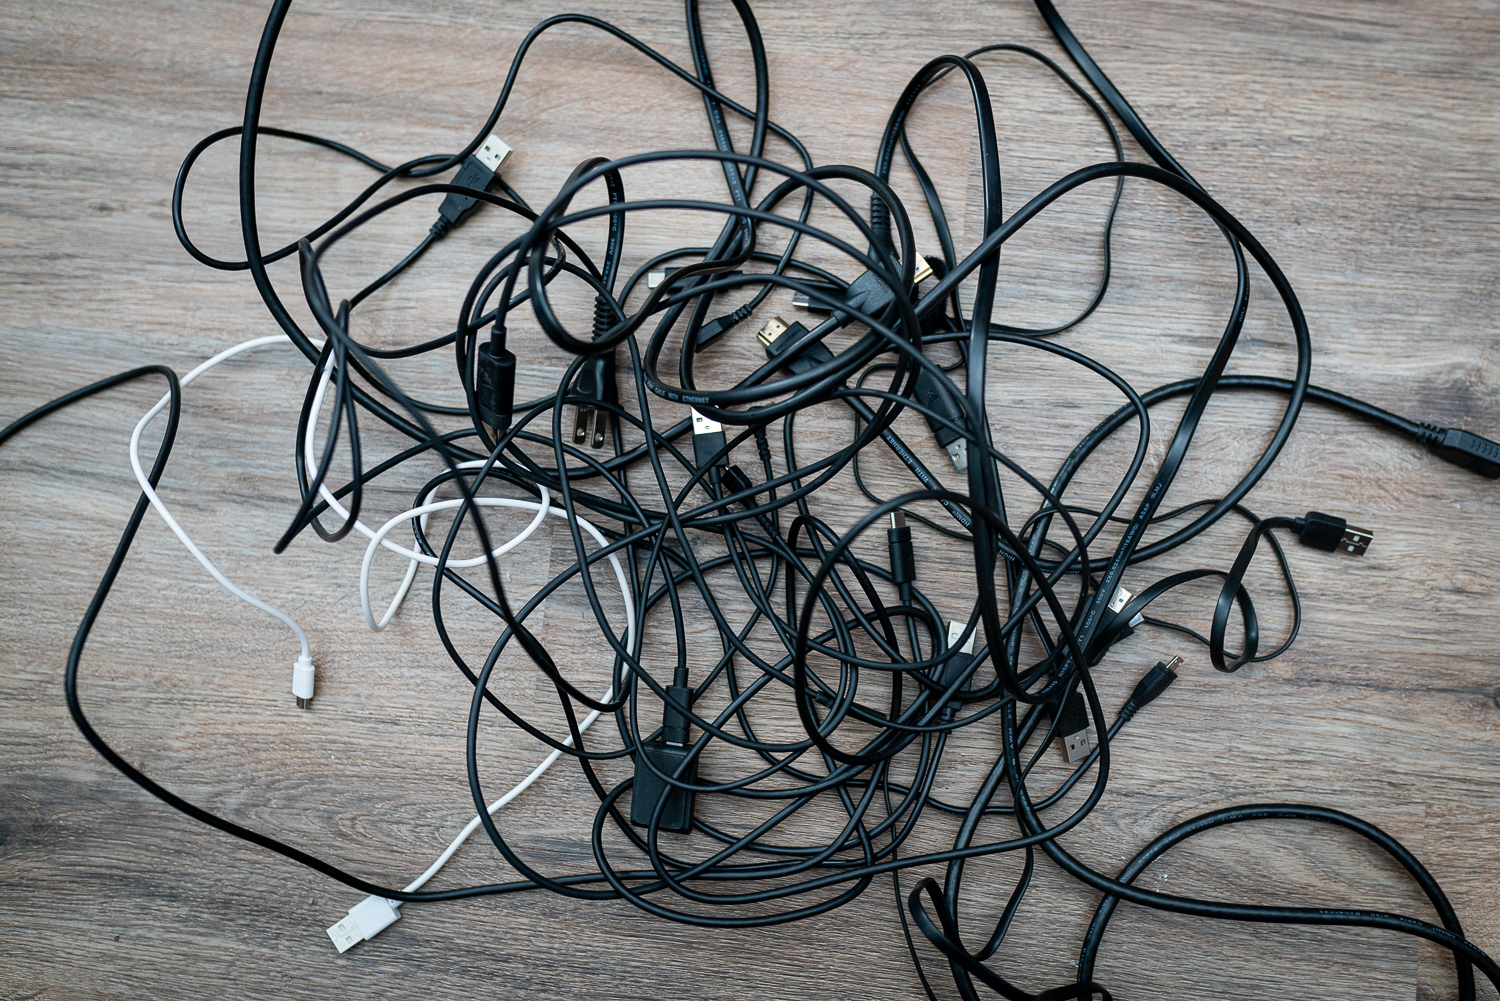 https://www.digitaltrends.com/wp-content/uploads/2022/03/mess-of-cables.jpg?fit=1500%2C1001&p=1